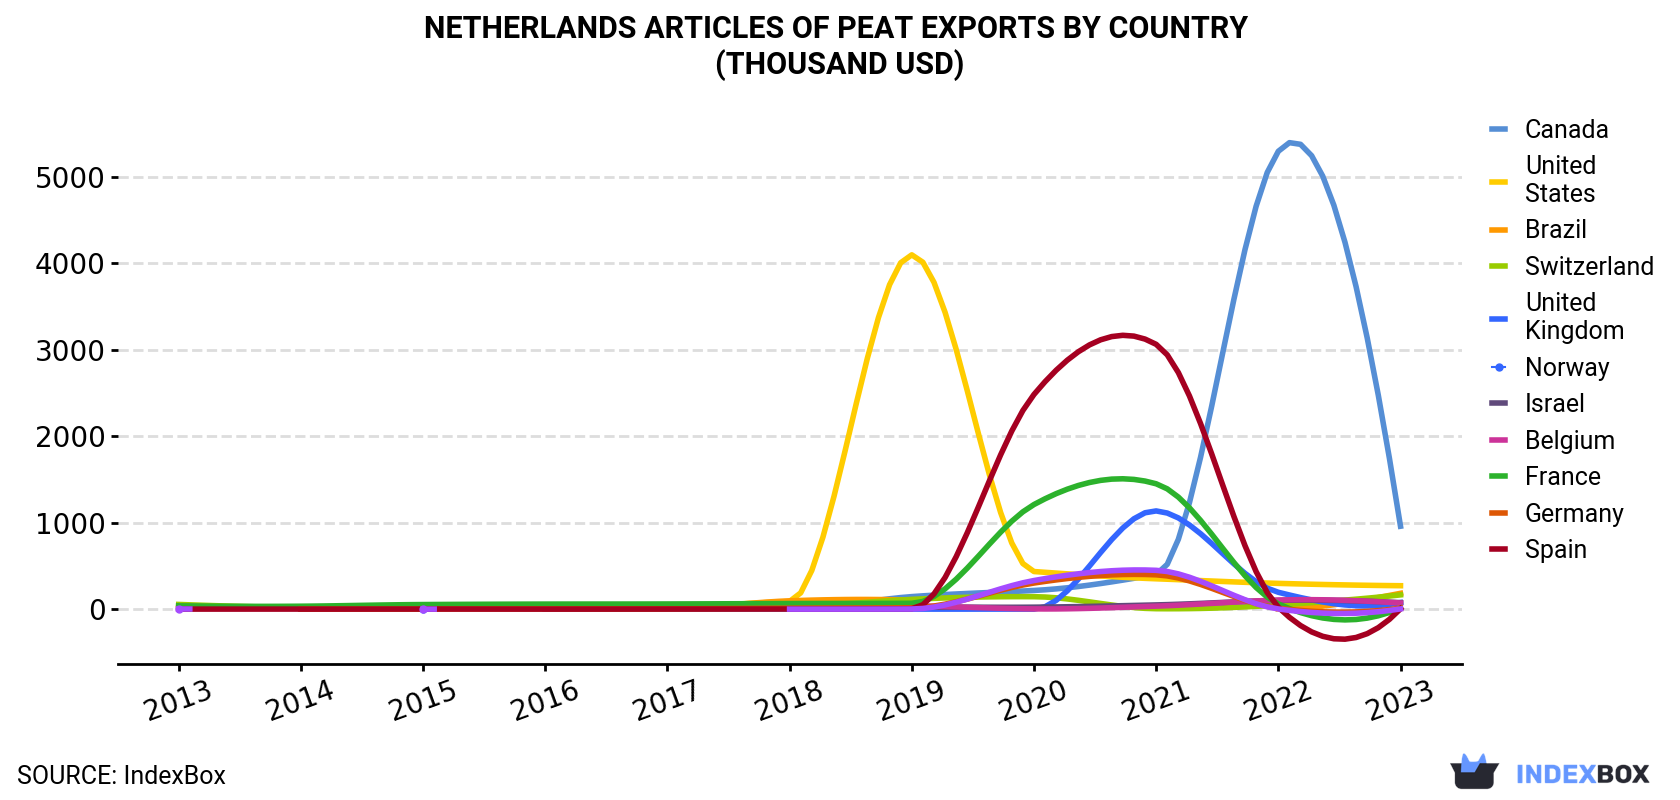 Netherlands Articles Of Peat Exports By Country (Thousand USD)